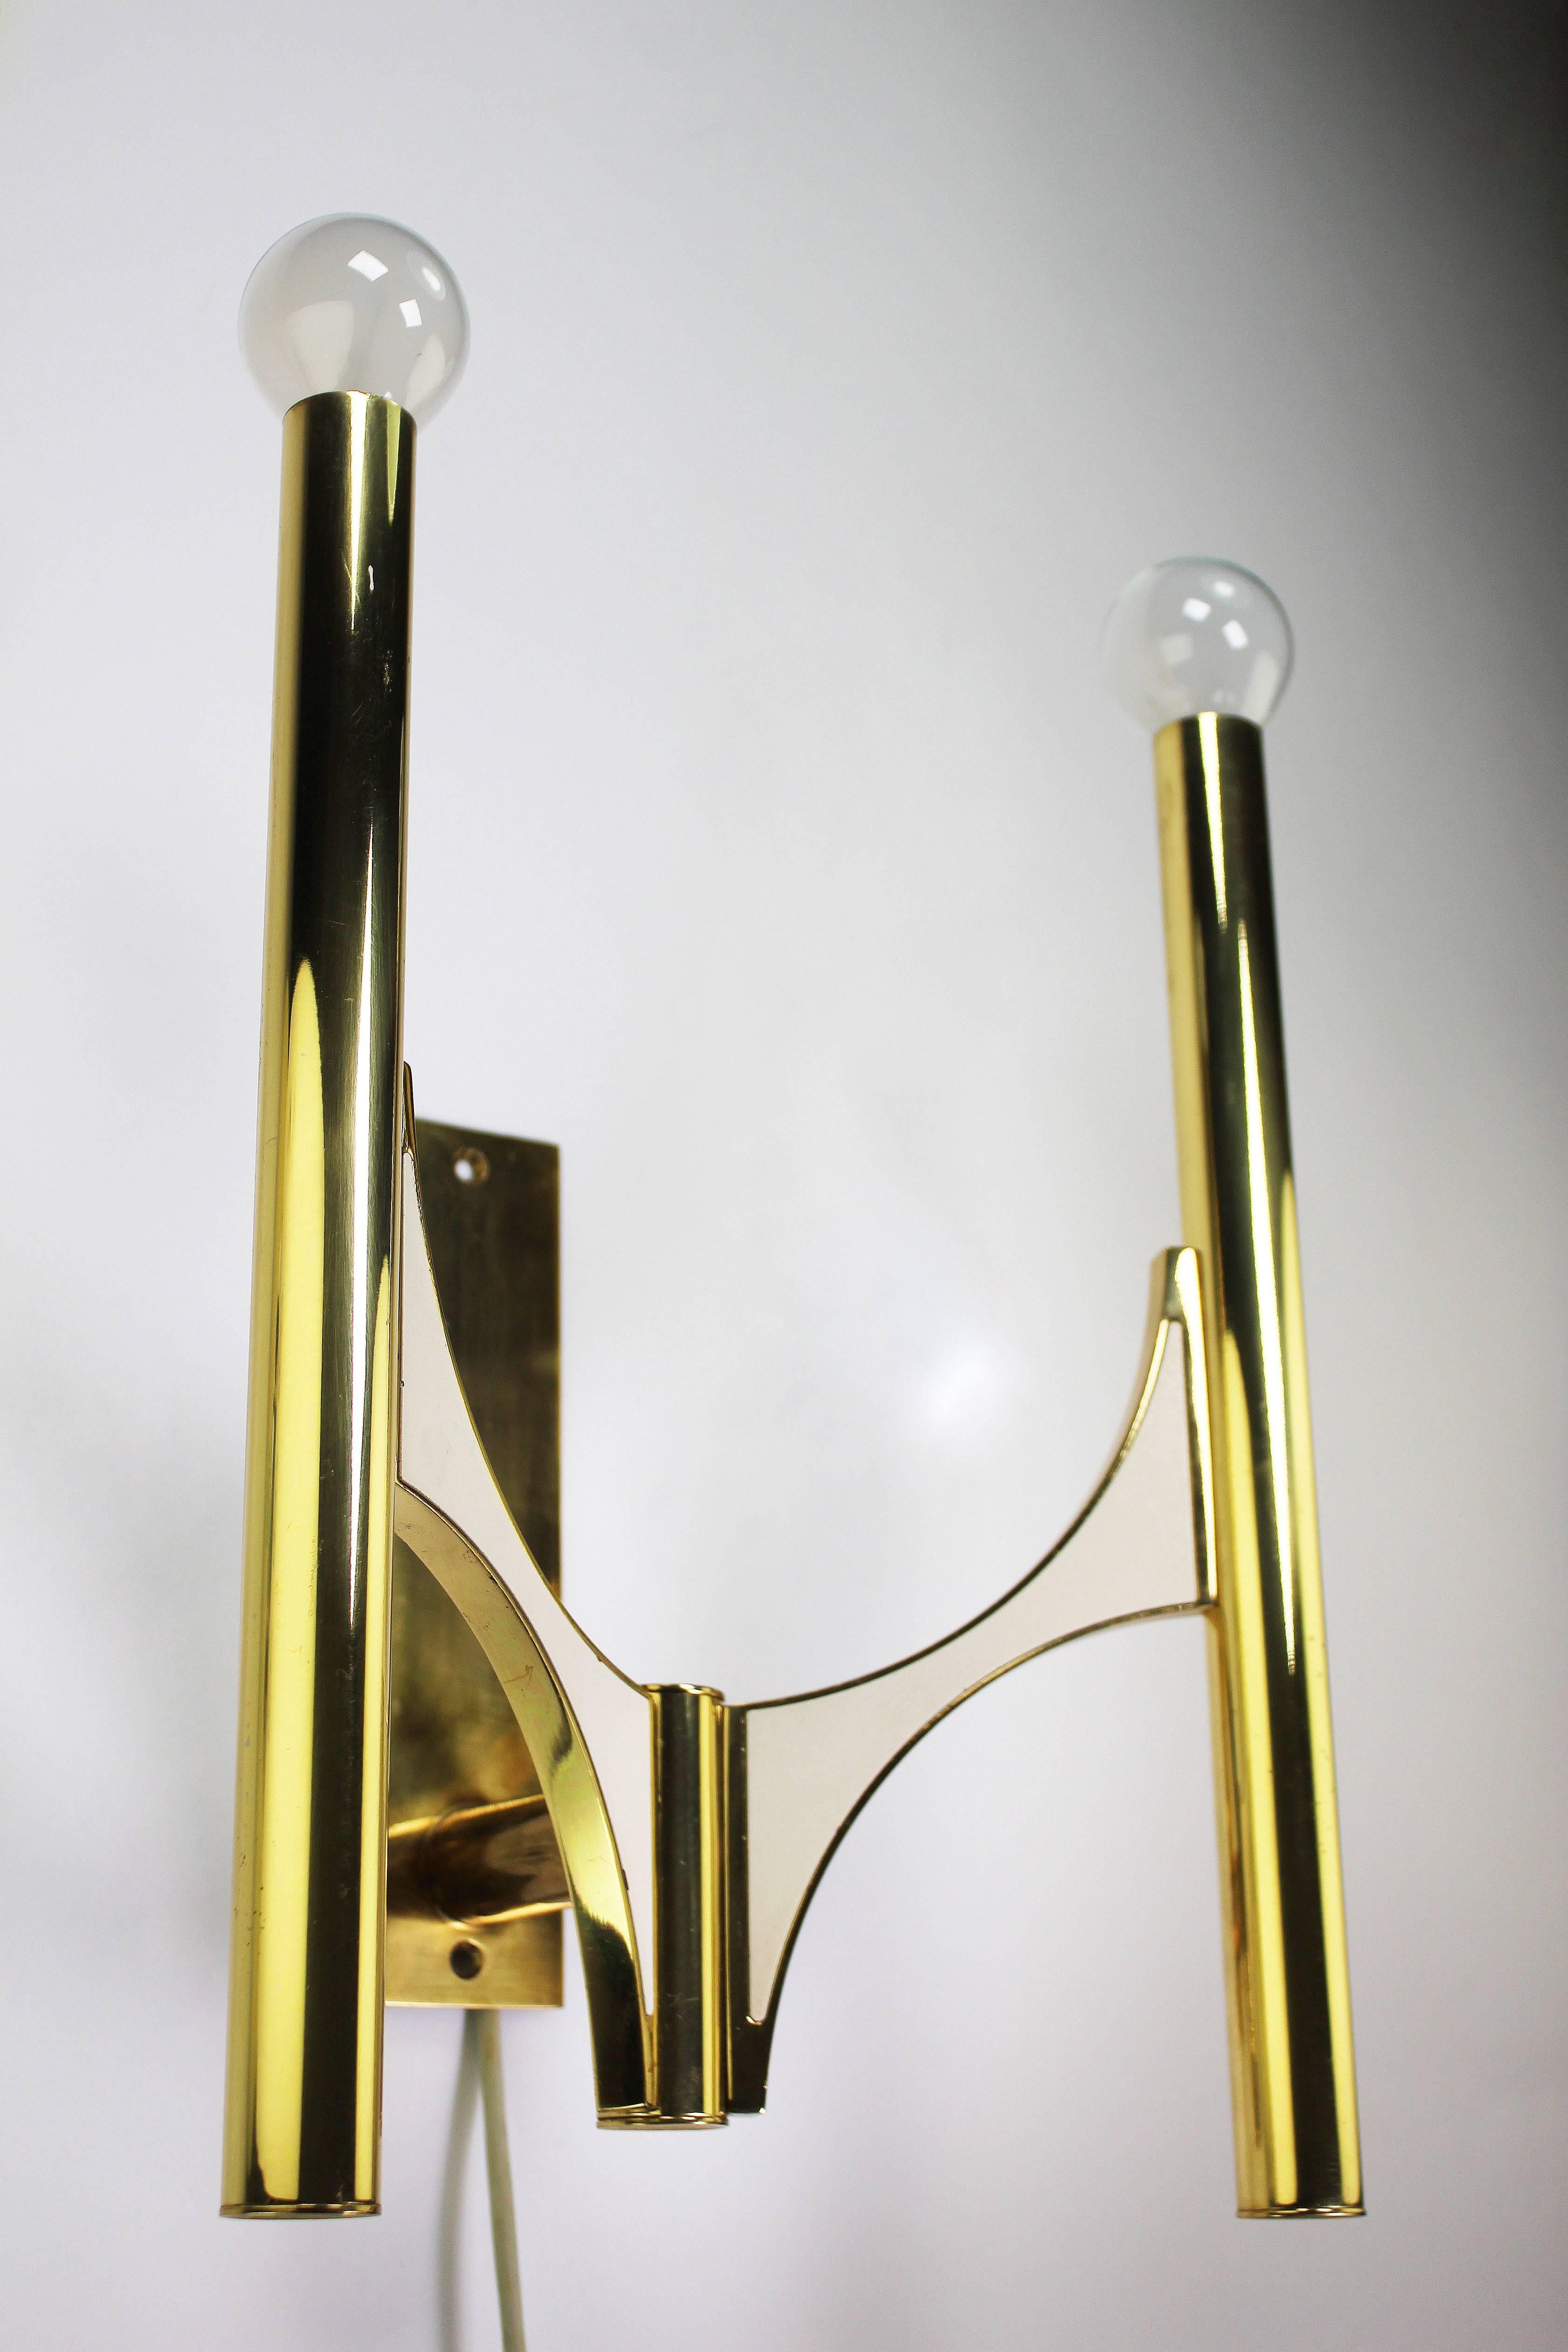 Three elegant, sculptural and minimalist Italian Modern double wall lights with polished brass and white metal sides. Designed by Gaetano Sciolari for Lightolier in the early 1970s. Good vintage condition consistent with age and wear.
Price is per